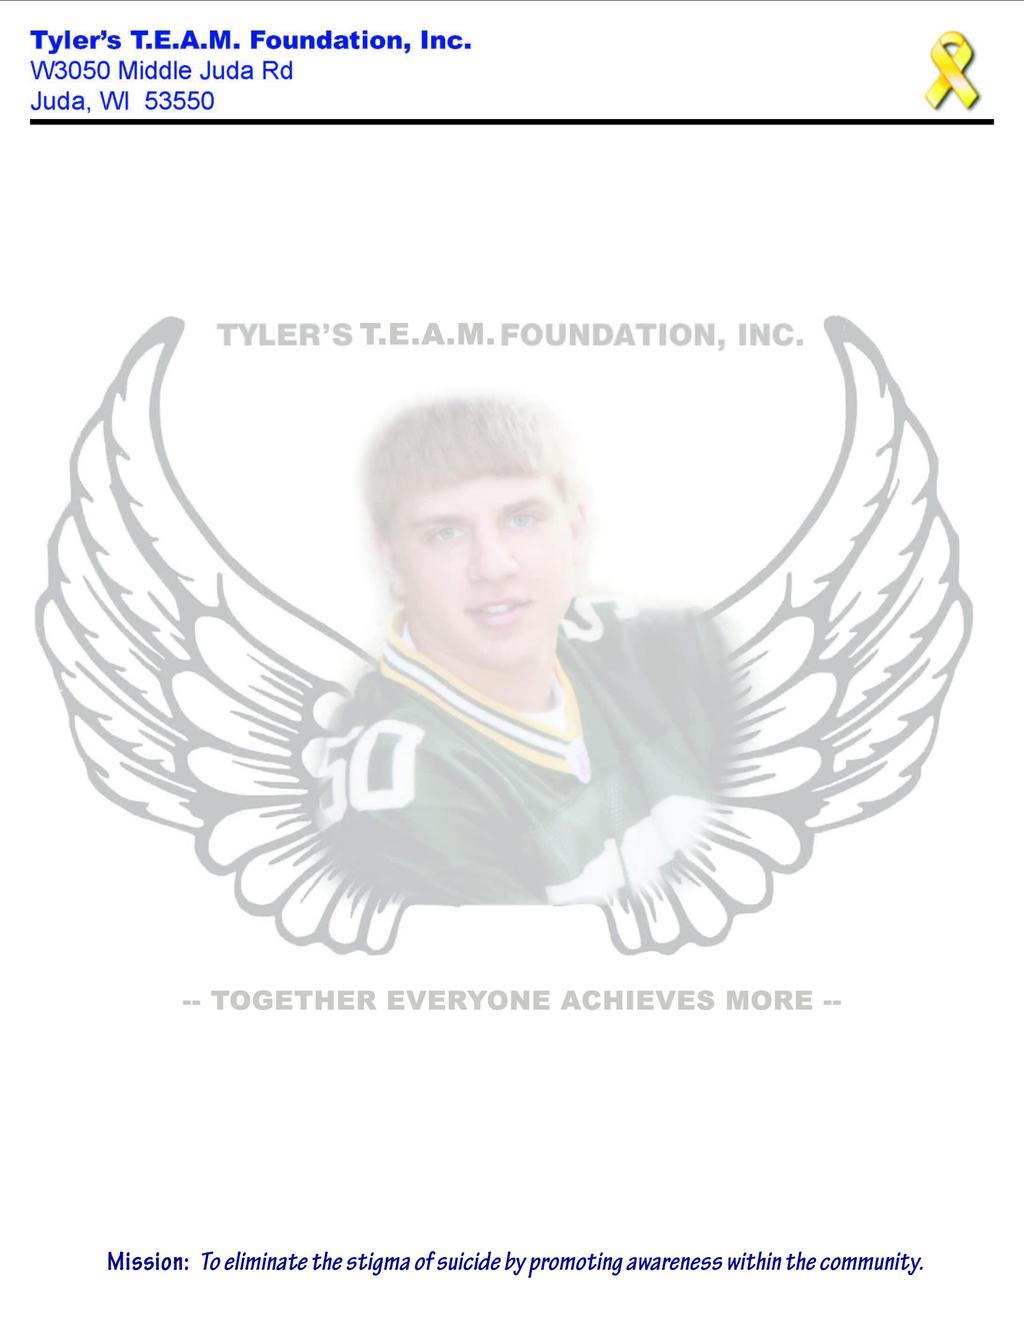 2017 Scholarship Program 4 Scholarships Available! Tyler s TEAM Foundation, Inc. was founded in 2013, in memory of Tyler Pierce, with the mission to assist in promoting the awareness of suicide.